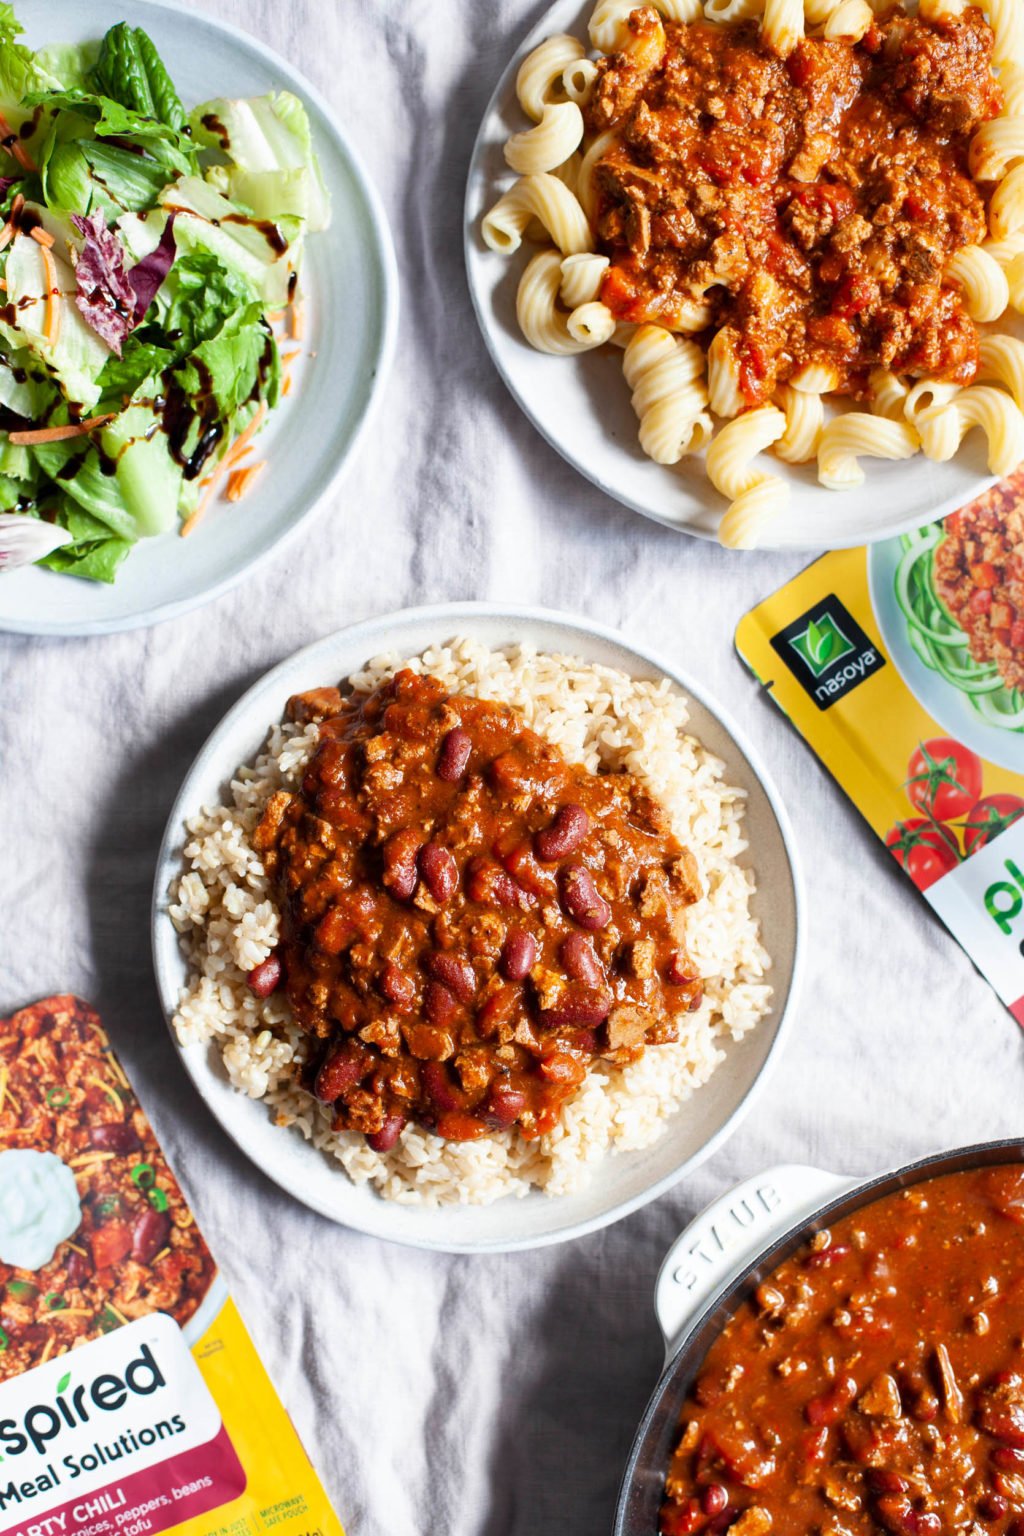 An assortment of plant-based meal options have been laid out for dinner, made with Nasoya's Plantspired Meal Solutions.